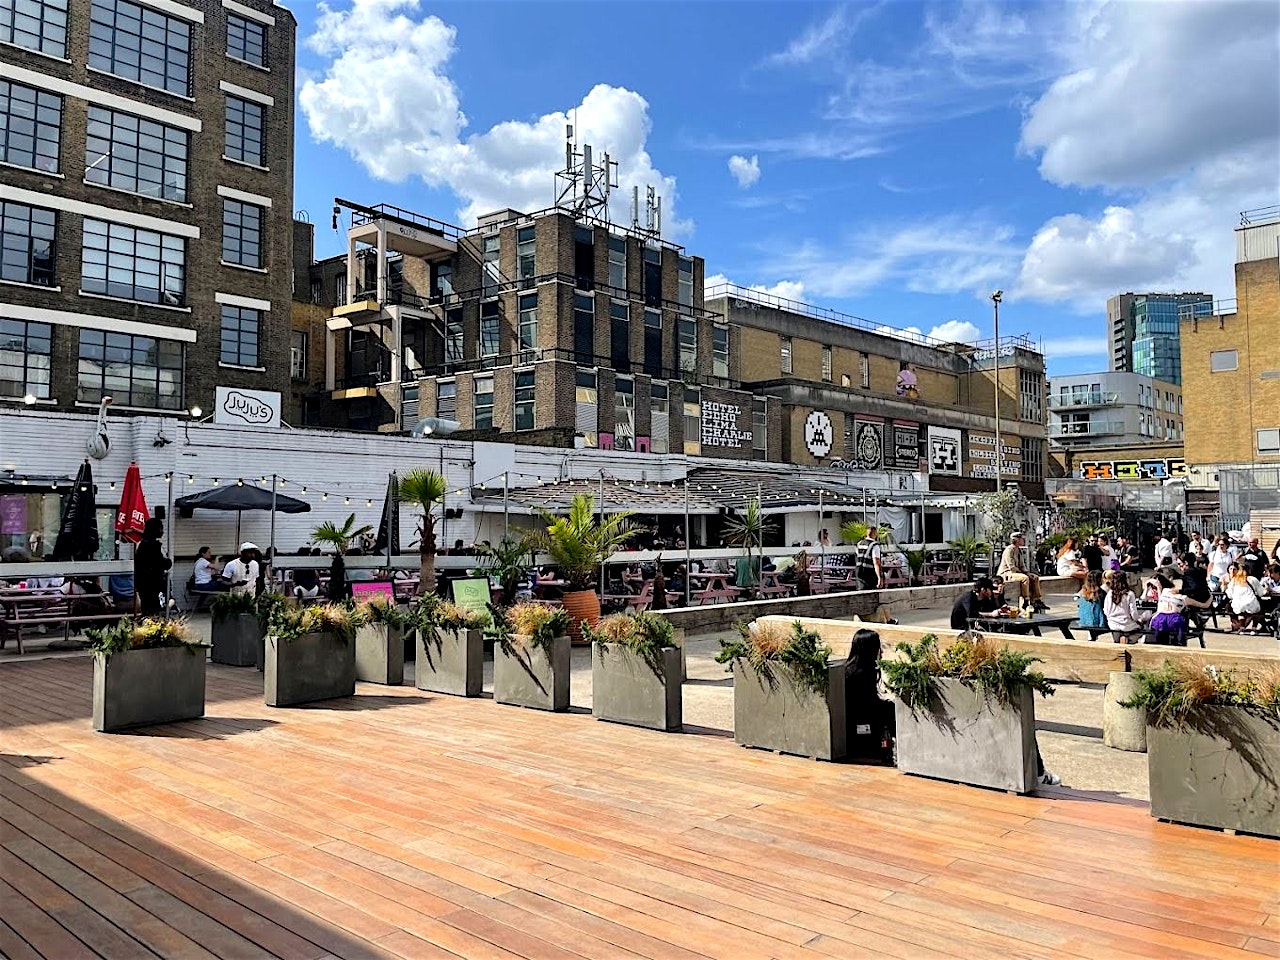 jujus bar and stage beer garden london